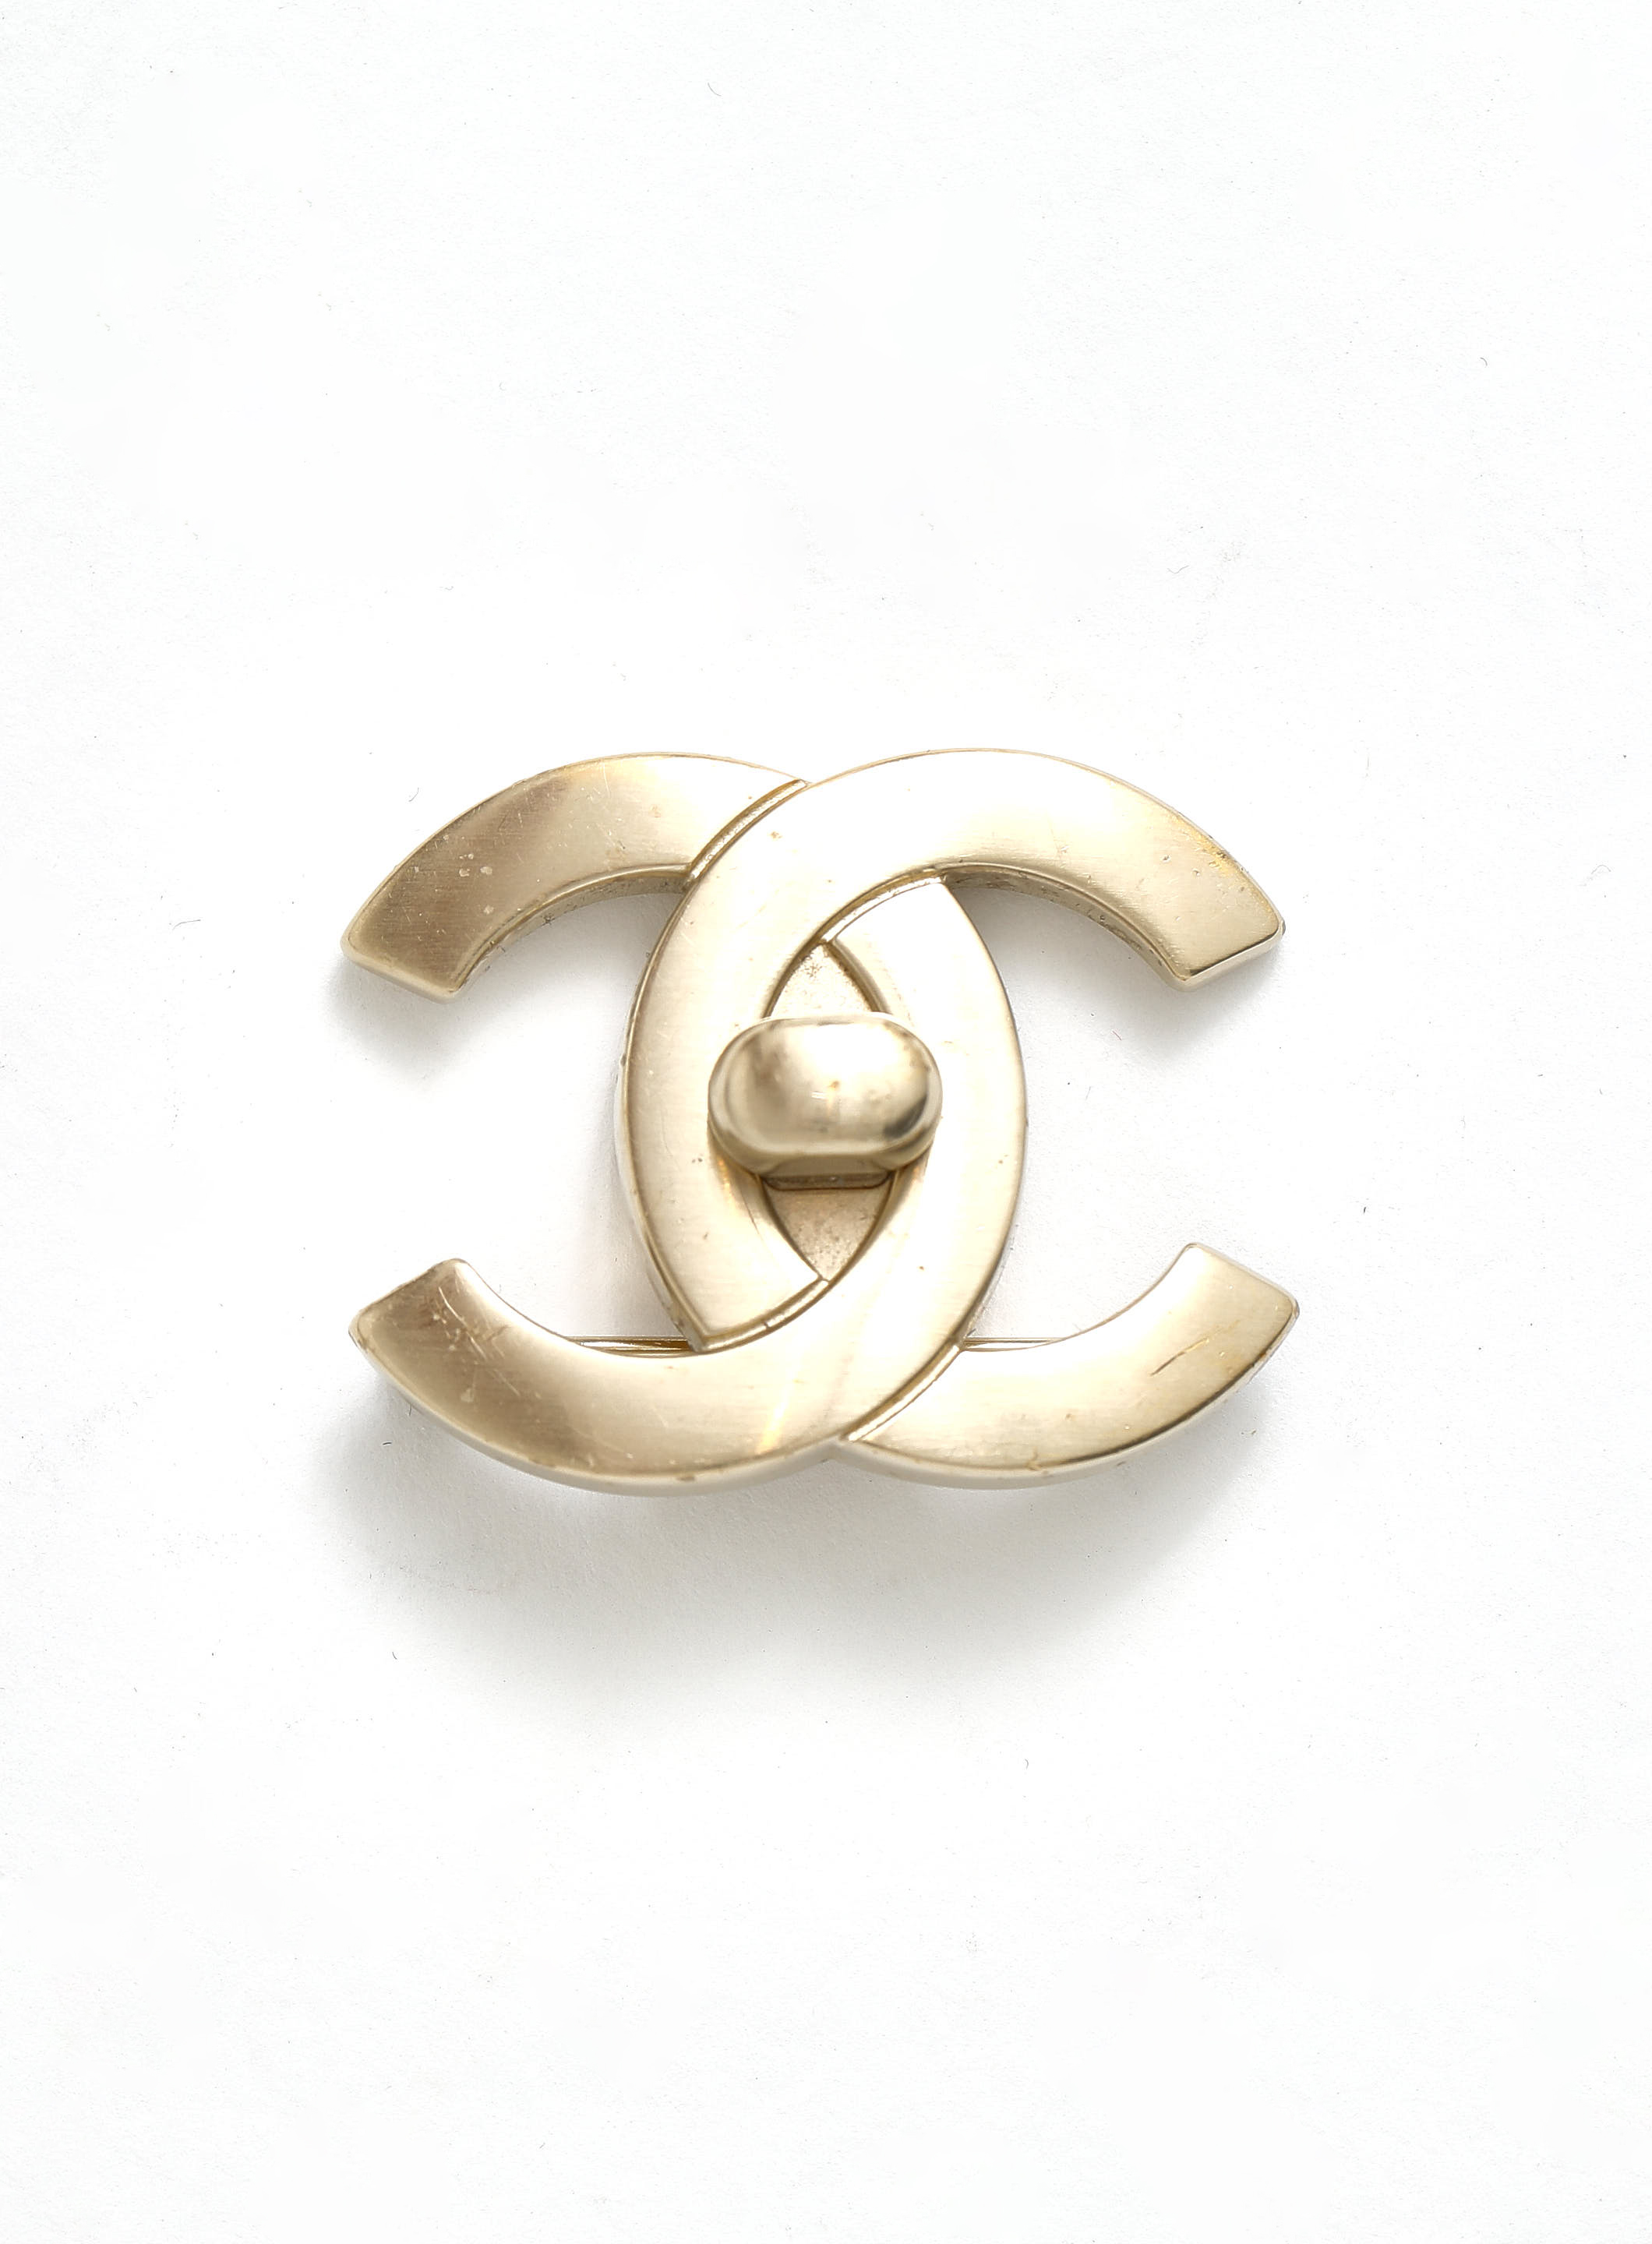 CC Inspired Brooch Pin Korean High Quality Fashion Jewelry CC Brooch Pin  Formal Event Jewelry